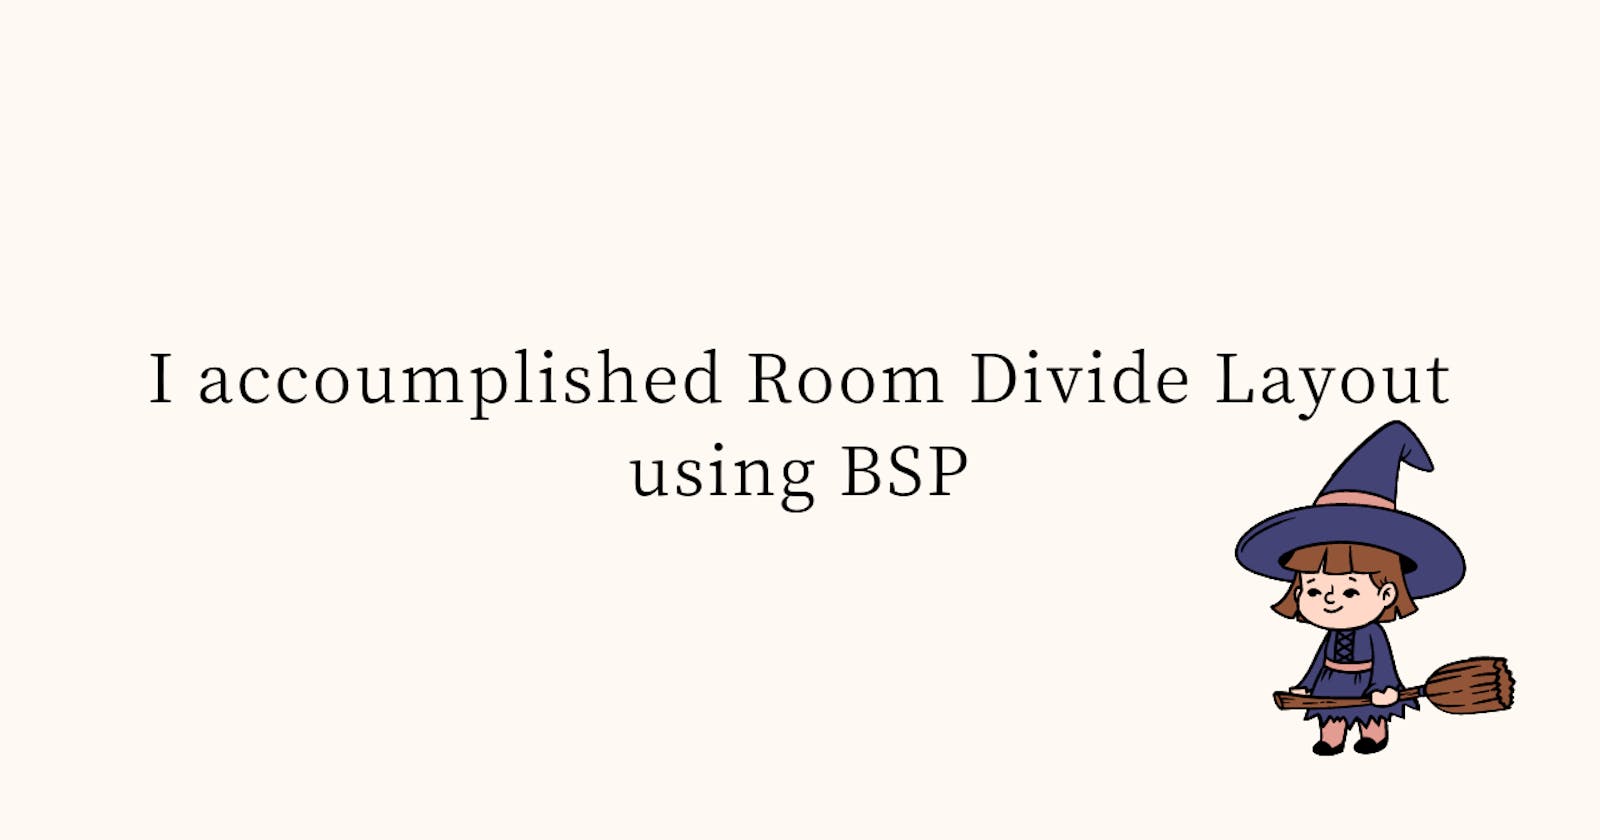 I accoumplished Room Divide Layout using BSP